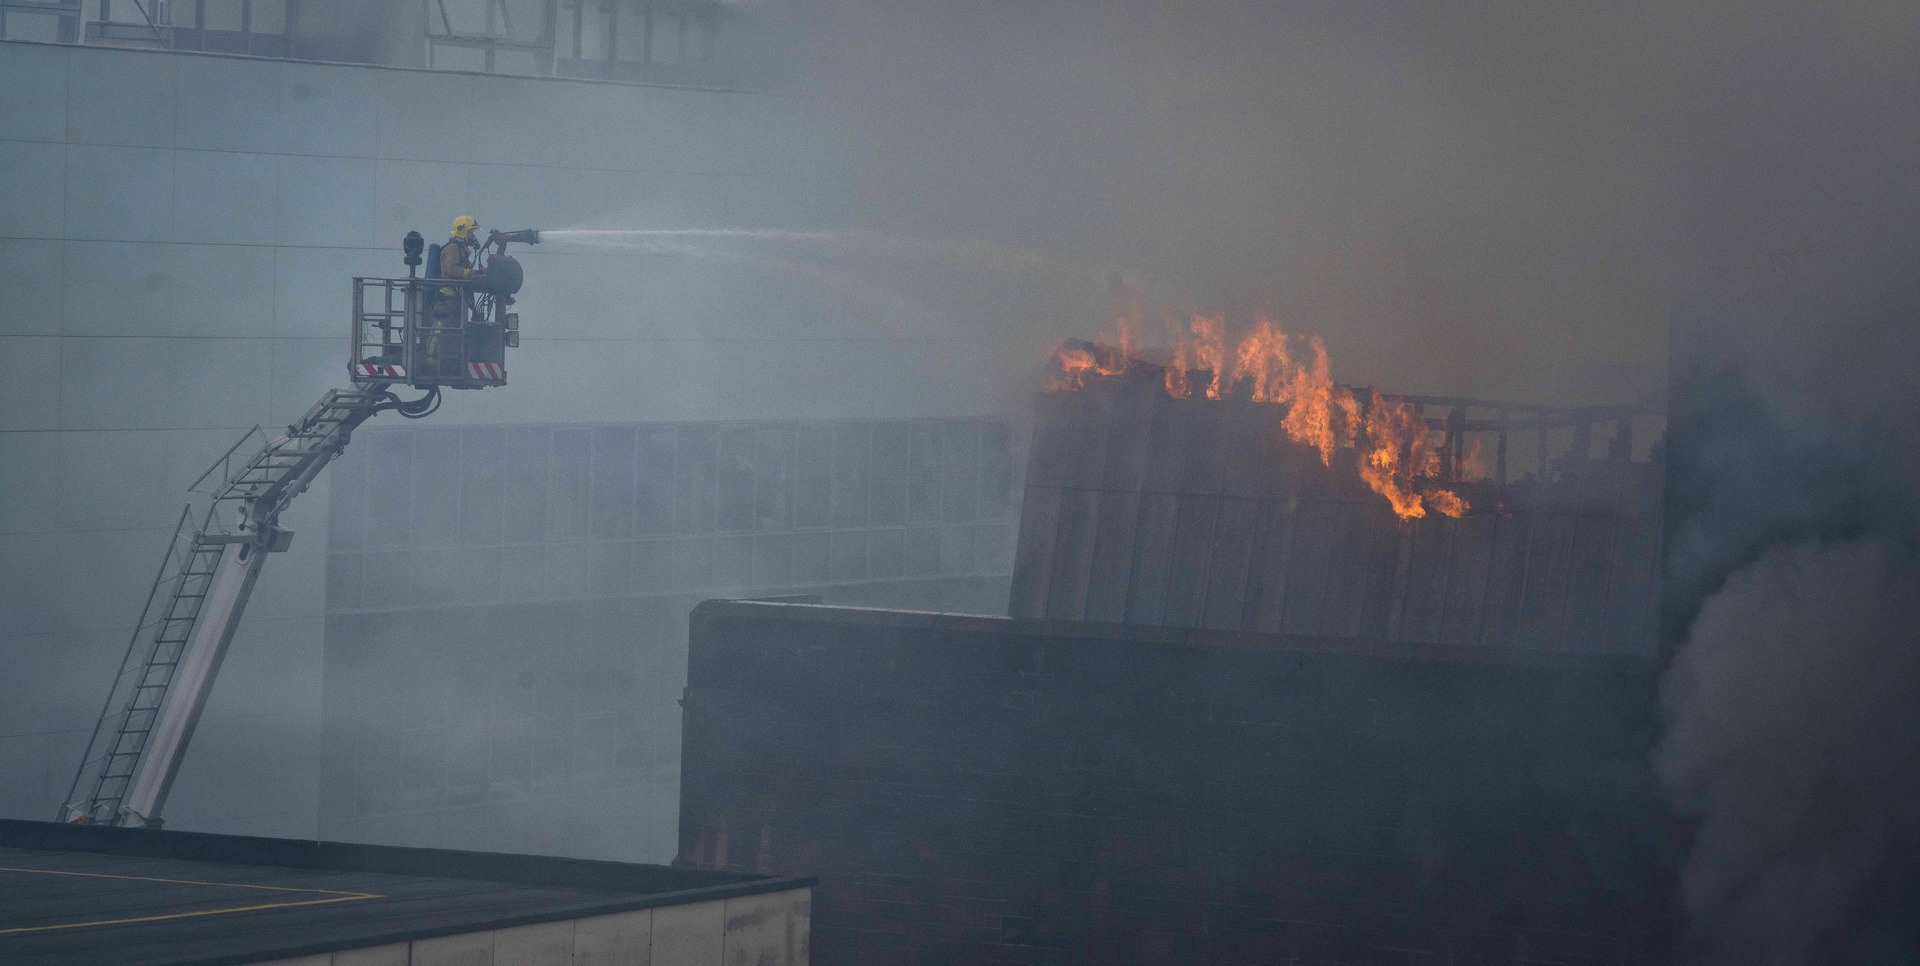 GLASGOW, SCOTLAND - MAY 23:  A firefighter works to put out a fire at the Glasgow School of Art Charles Rennie Mackintosh Building on May 23, 2014 